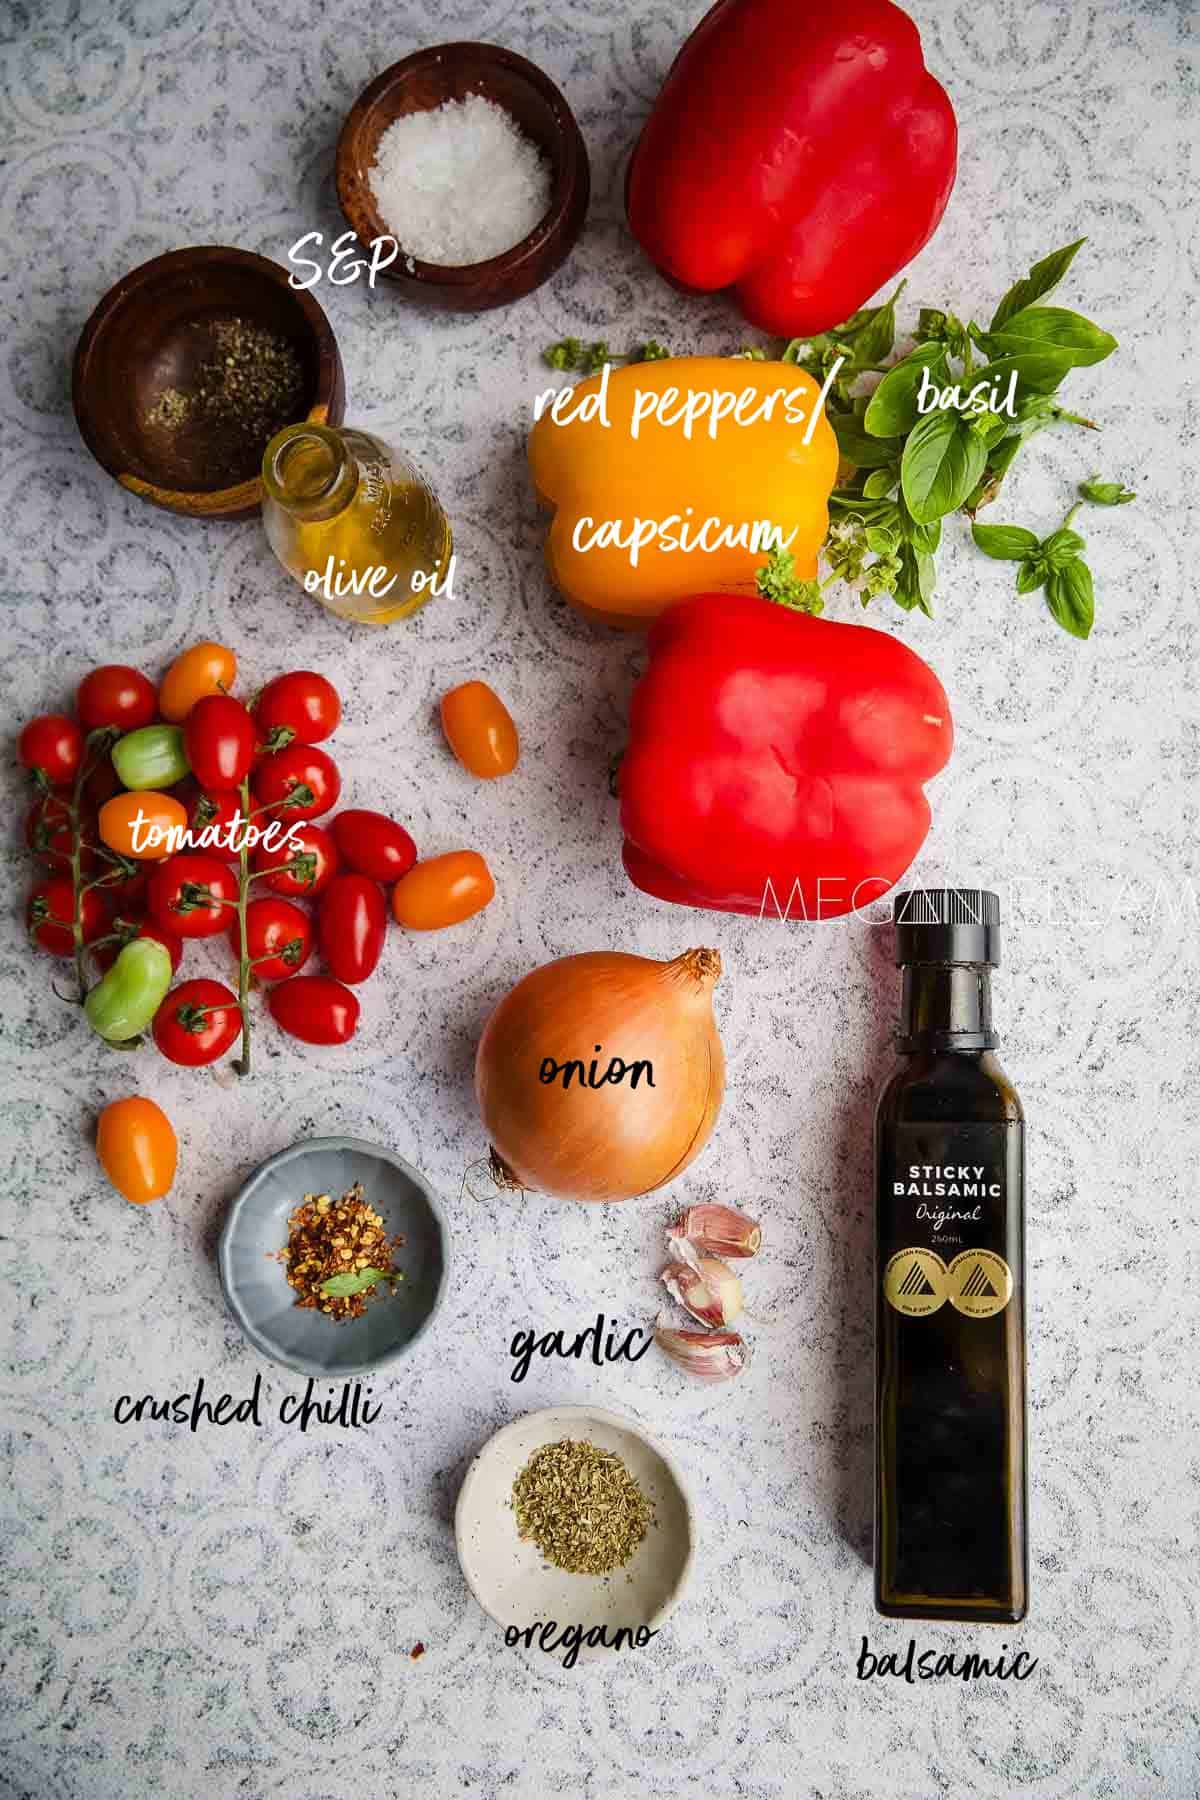 Peperonata recipe ingredients laid out on a tiled background with labels.